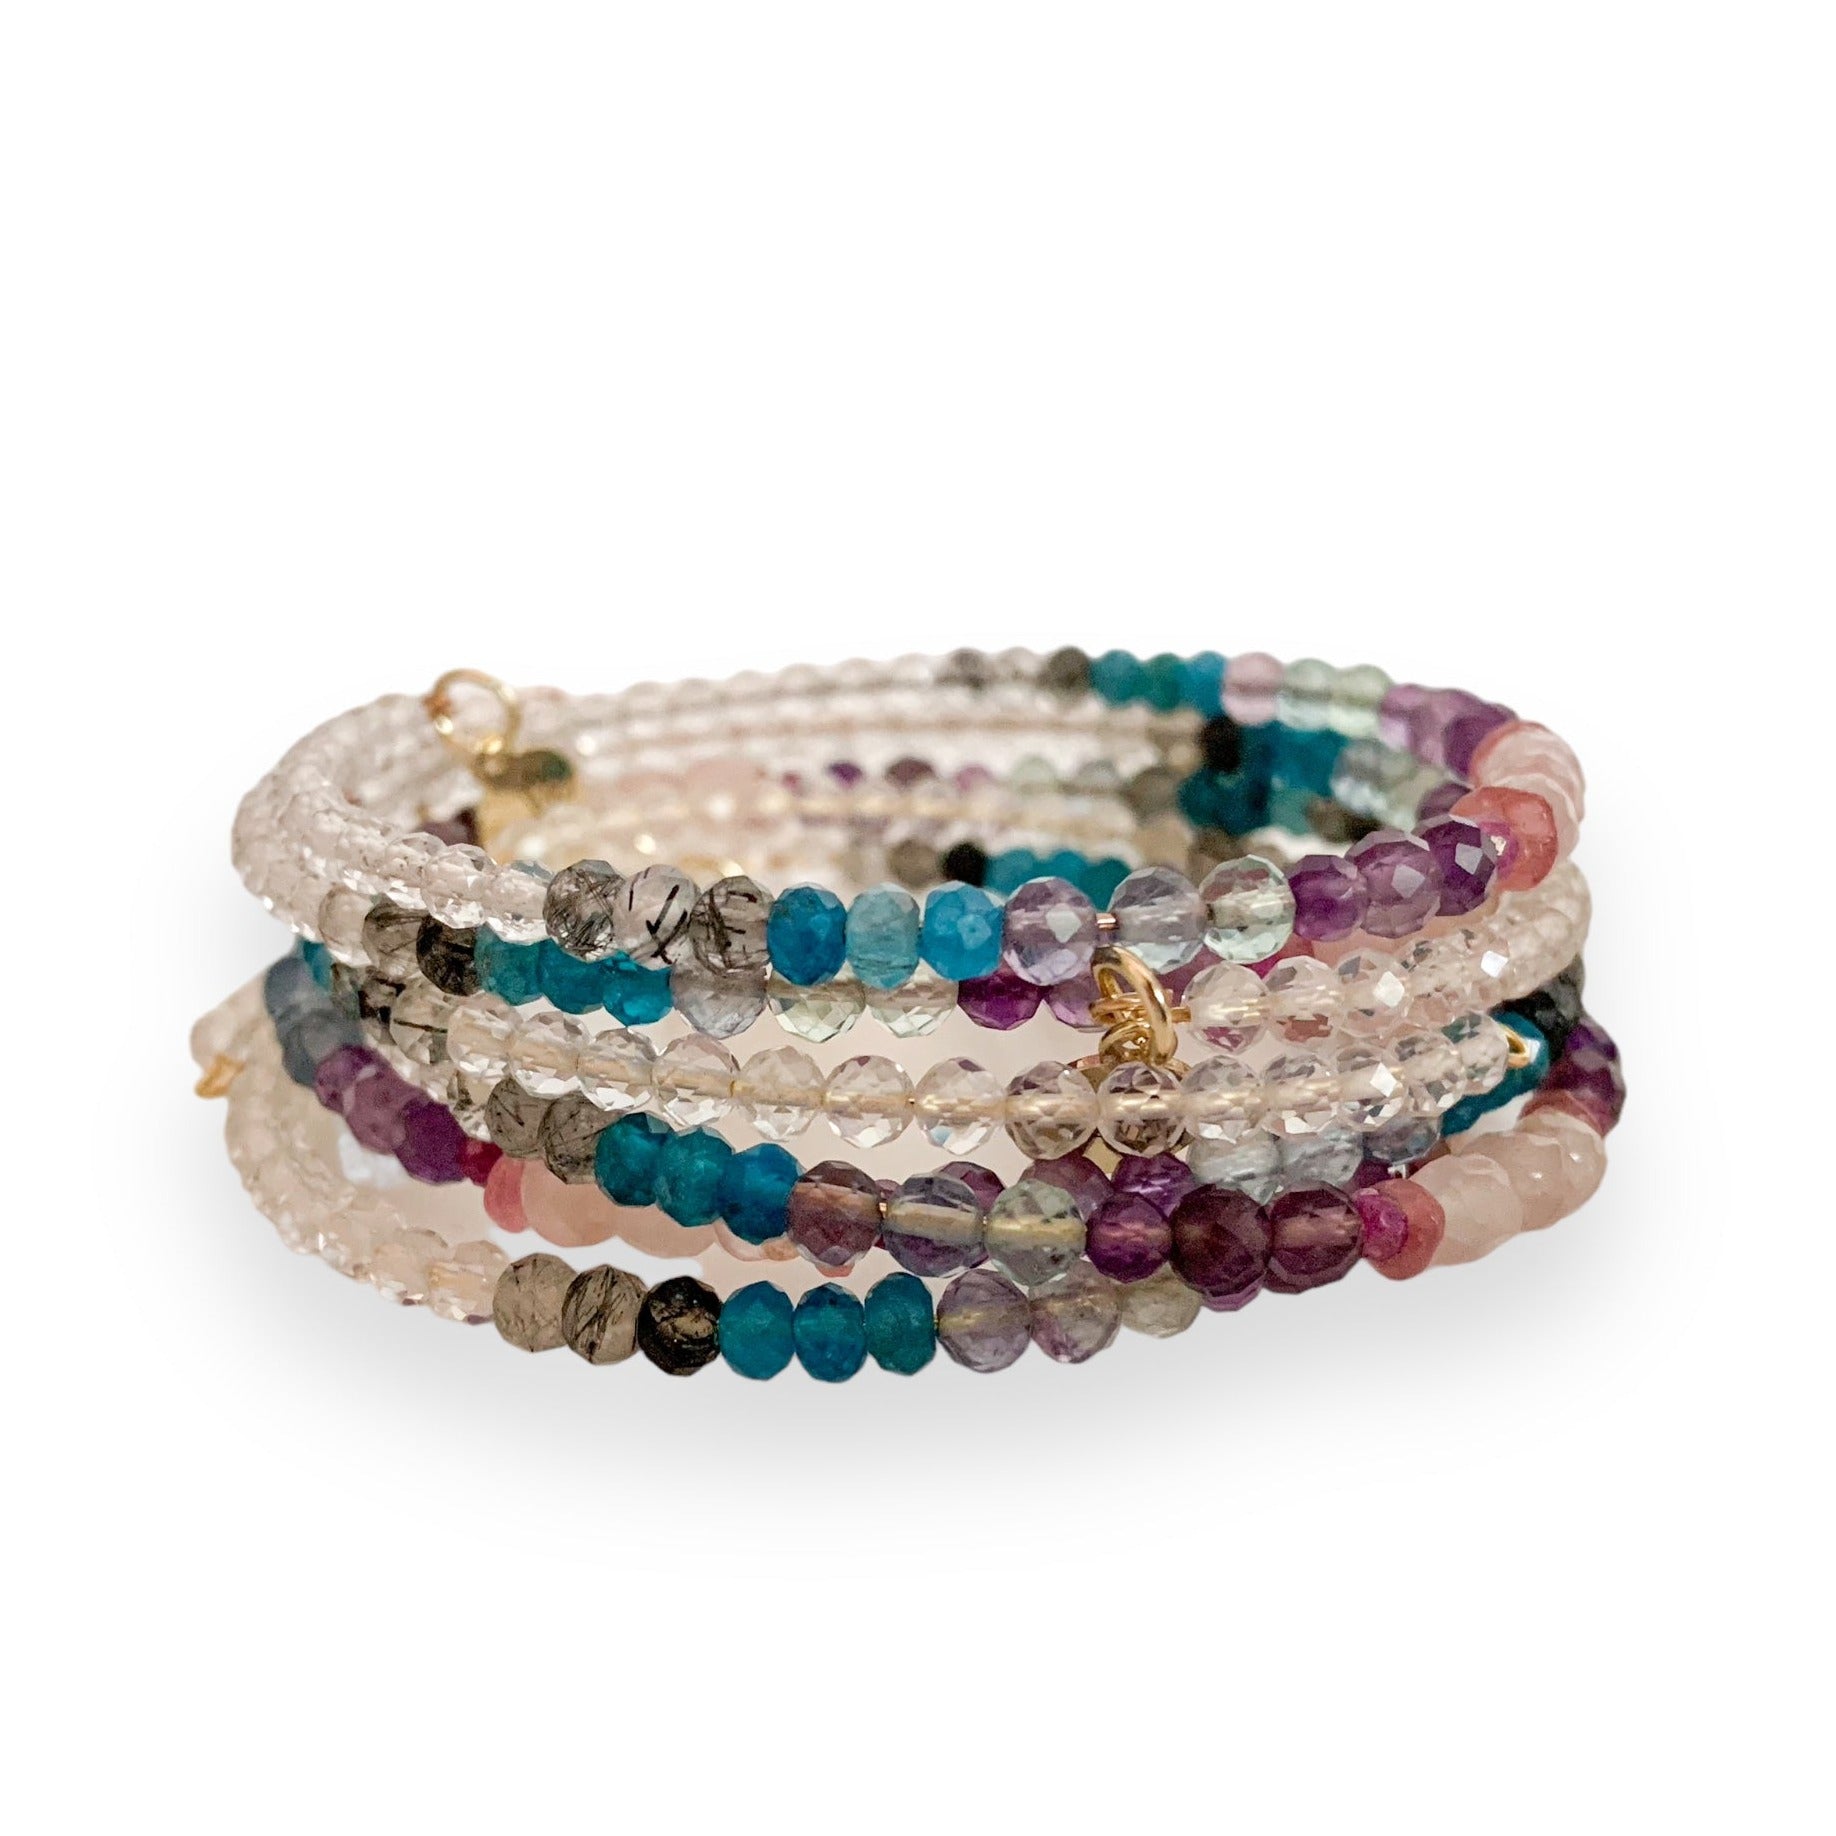 Inspiring Serenity Wrap Bracelet, aligning with highest intentions